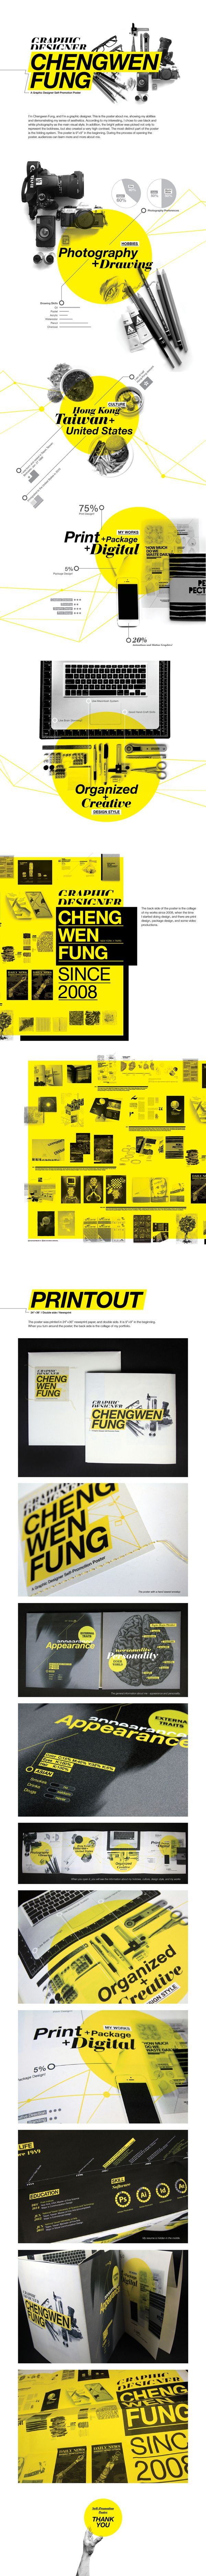 Self-Promotion poster by CHENGWEN fung, via Behance.  Nice web type and branding